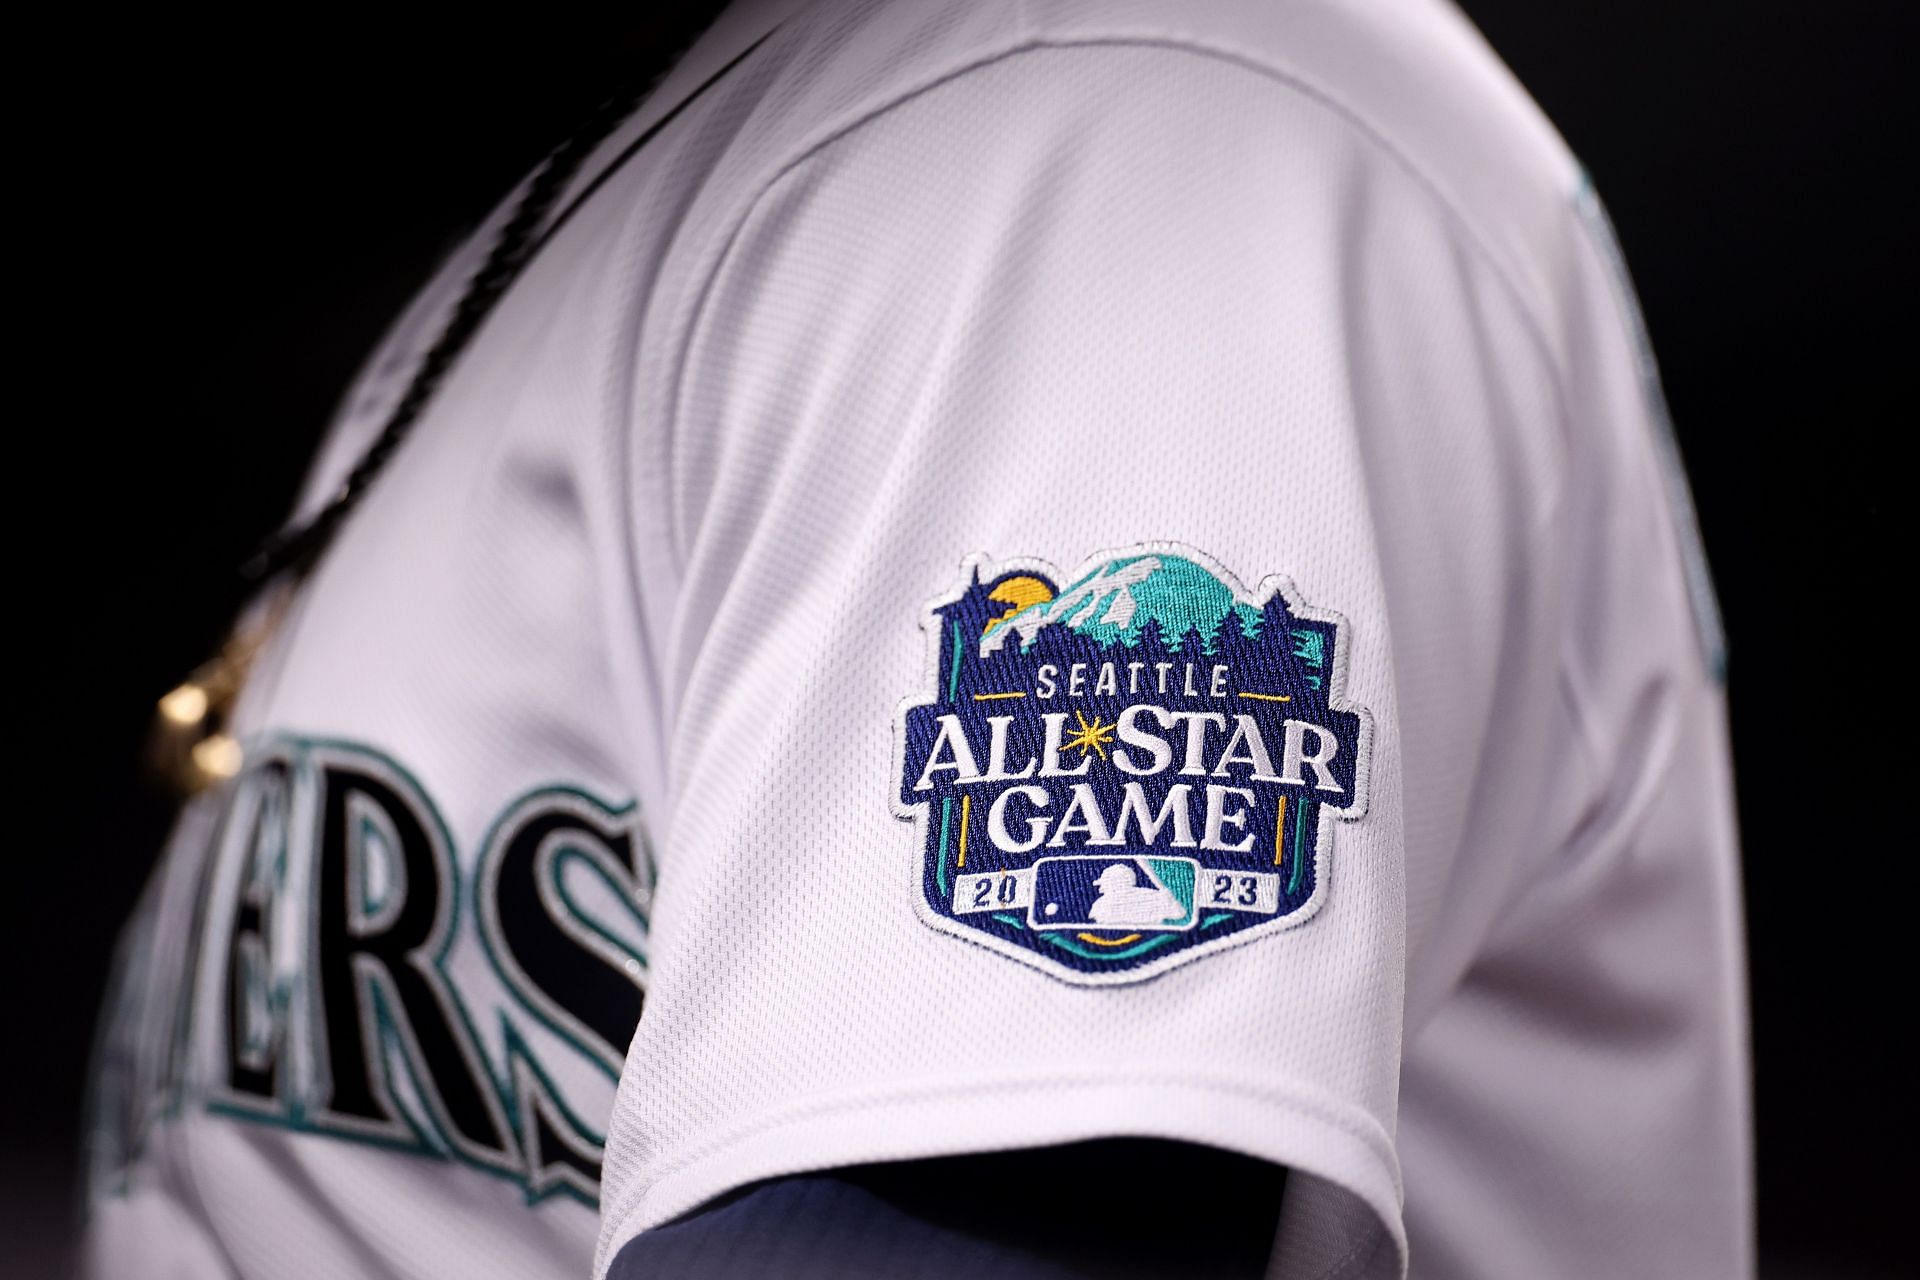 Poll time: What do you think of the All-Star jerseys? - Bluebird